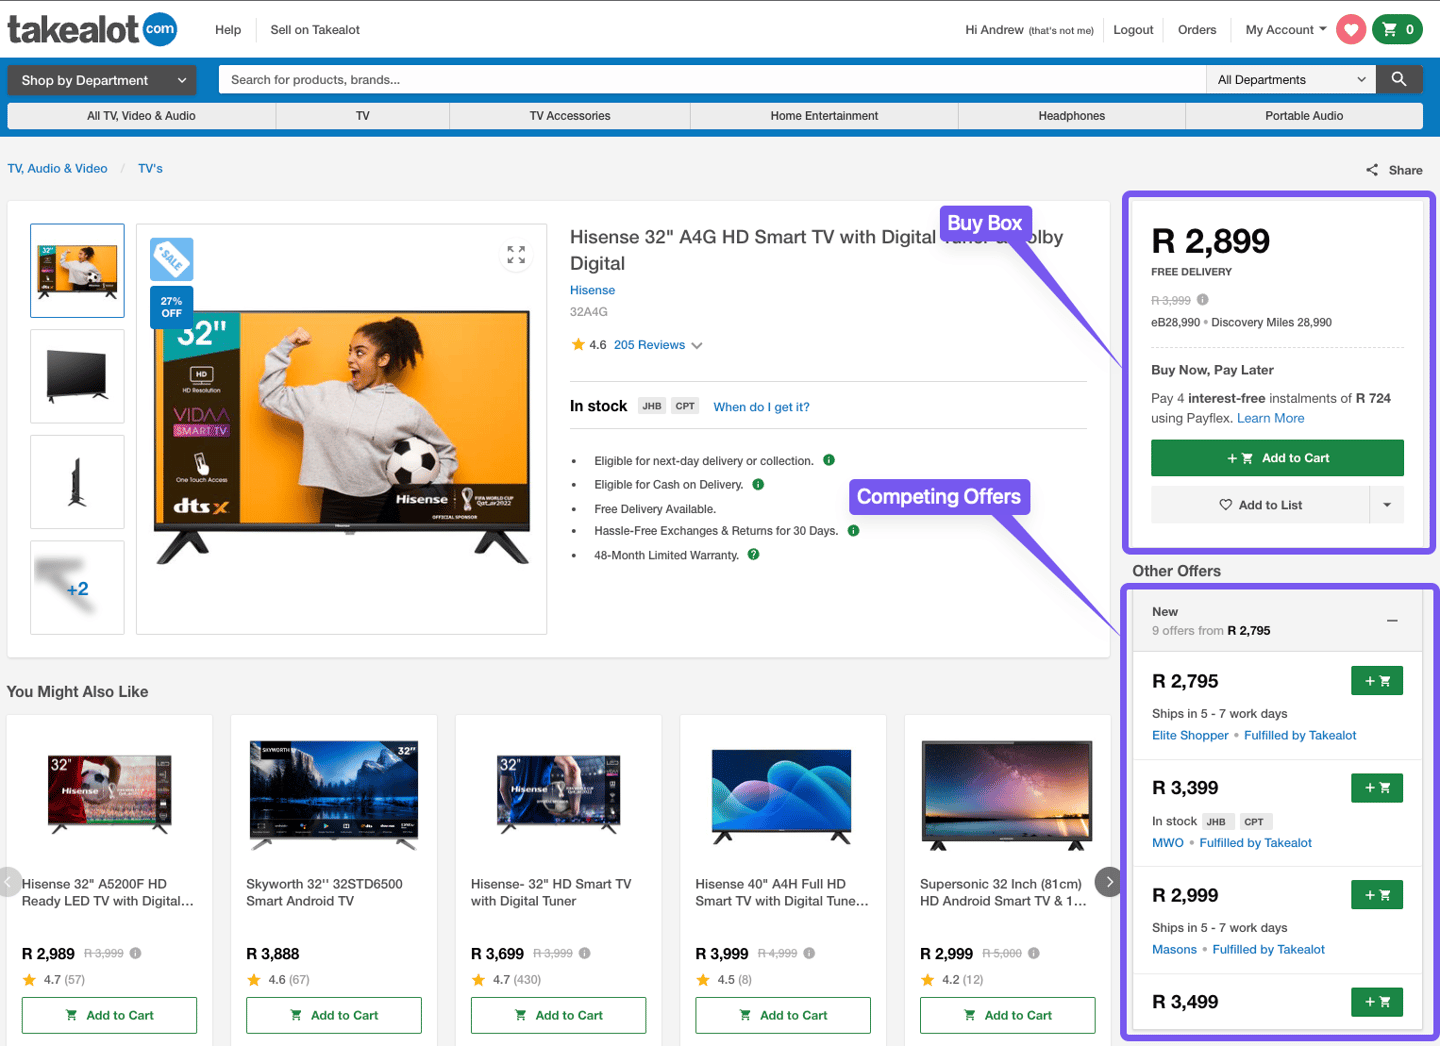 Screenshot of Takealot Product Page